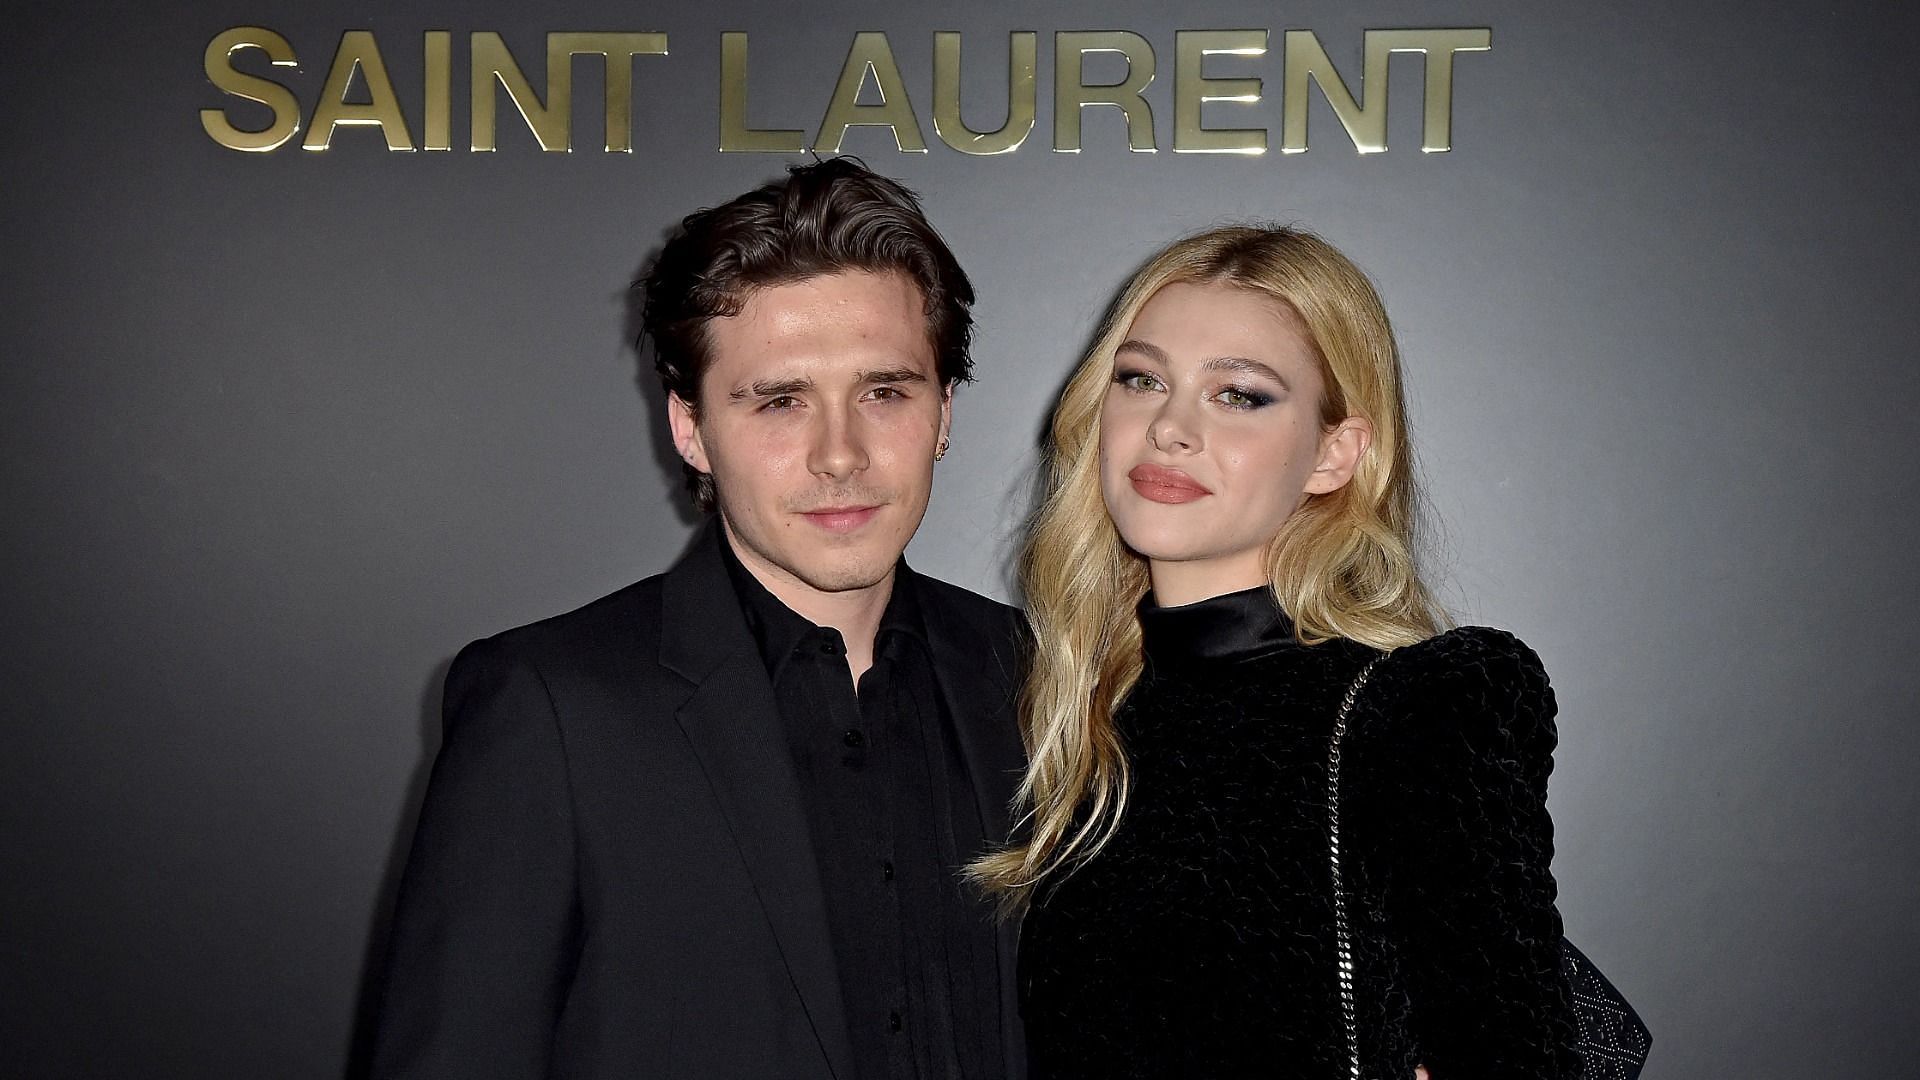 Brooklyn Beckham and Chloe Grace Moretz - A timeline of their